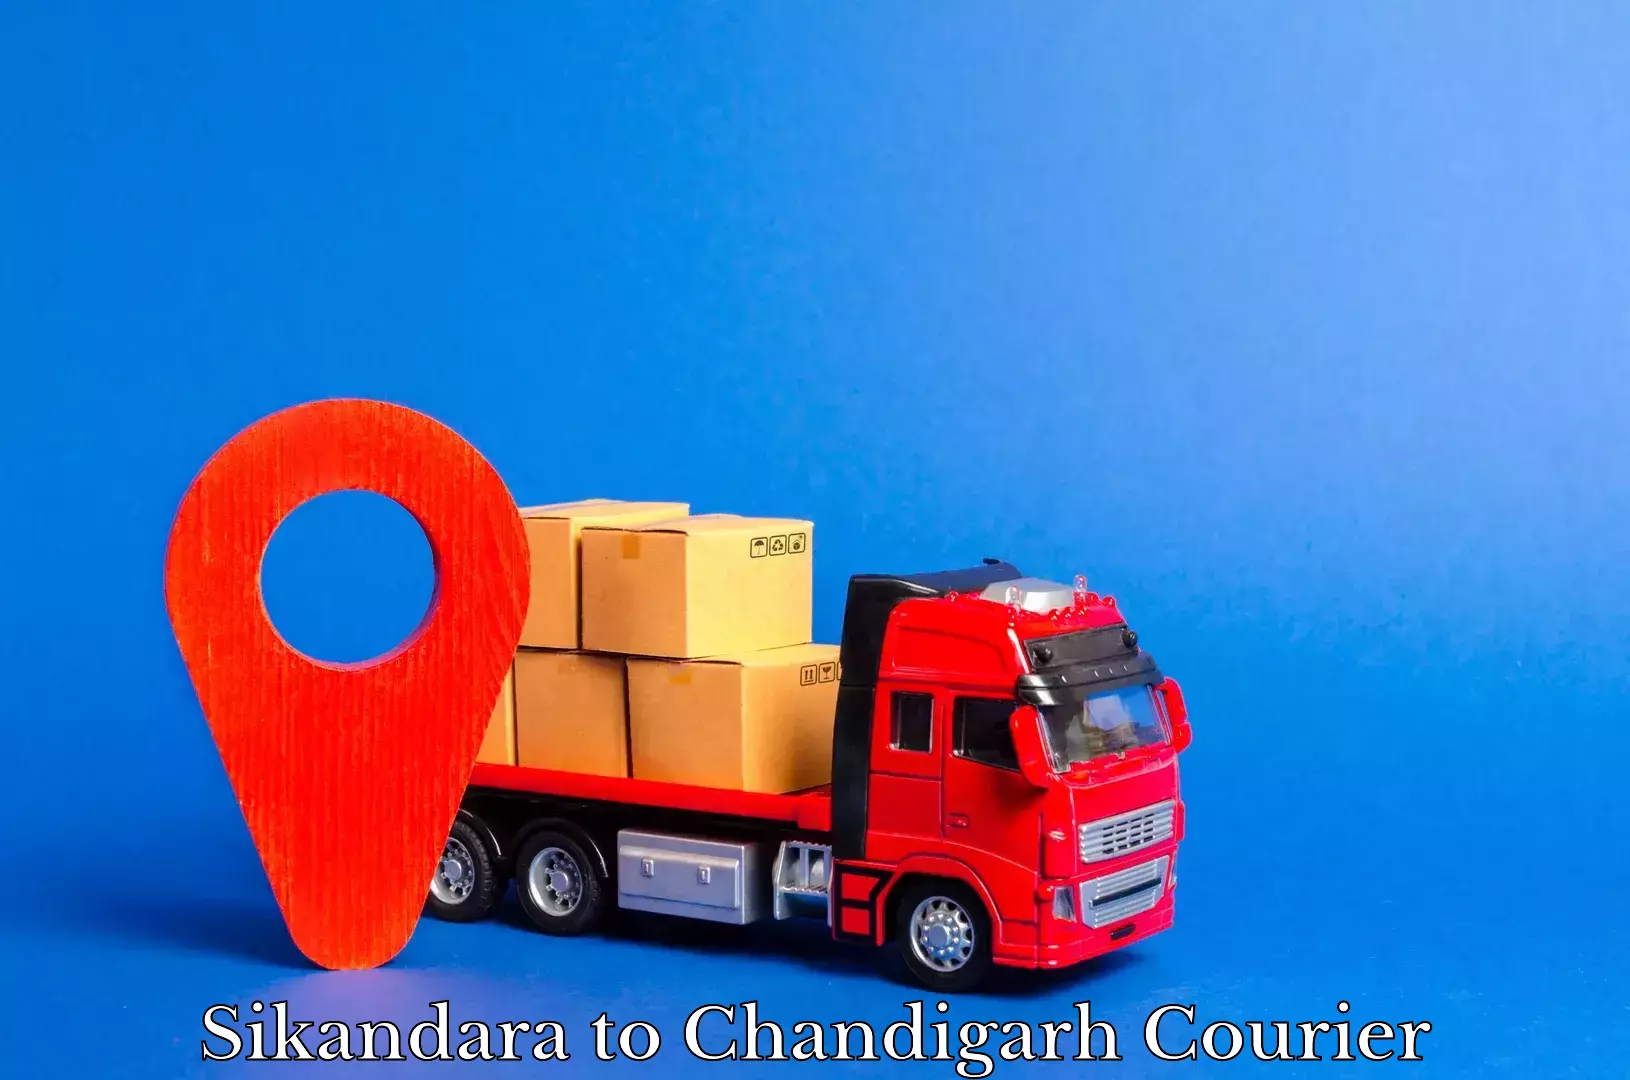 Nationwide courier service Sikandara to Chandigarh